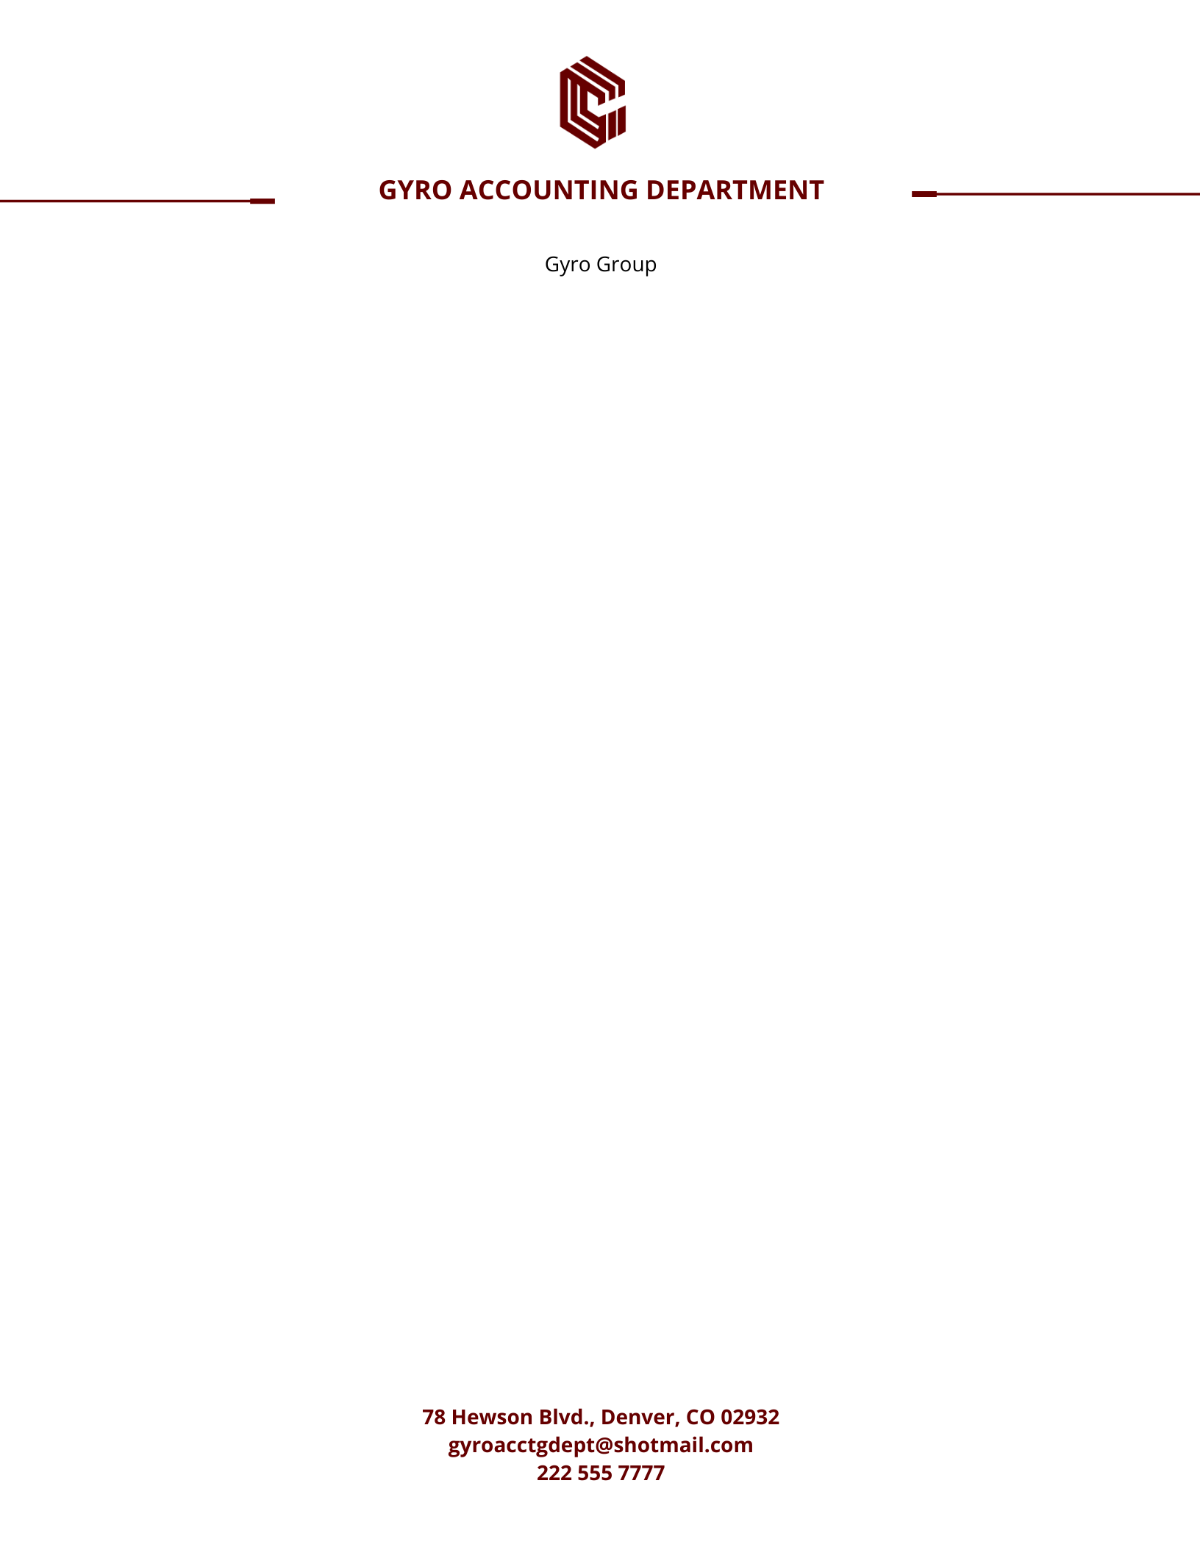 Accounting Department Letterhead